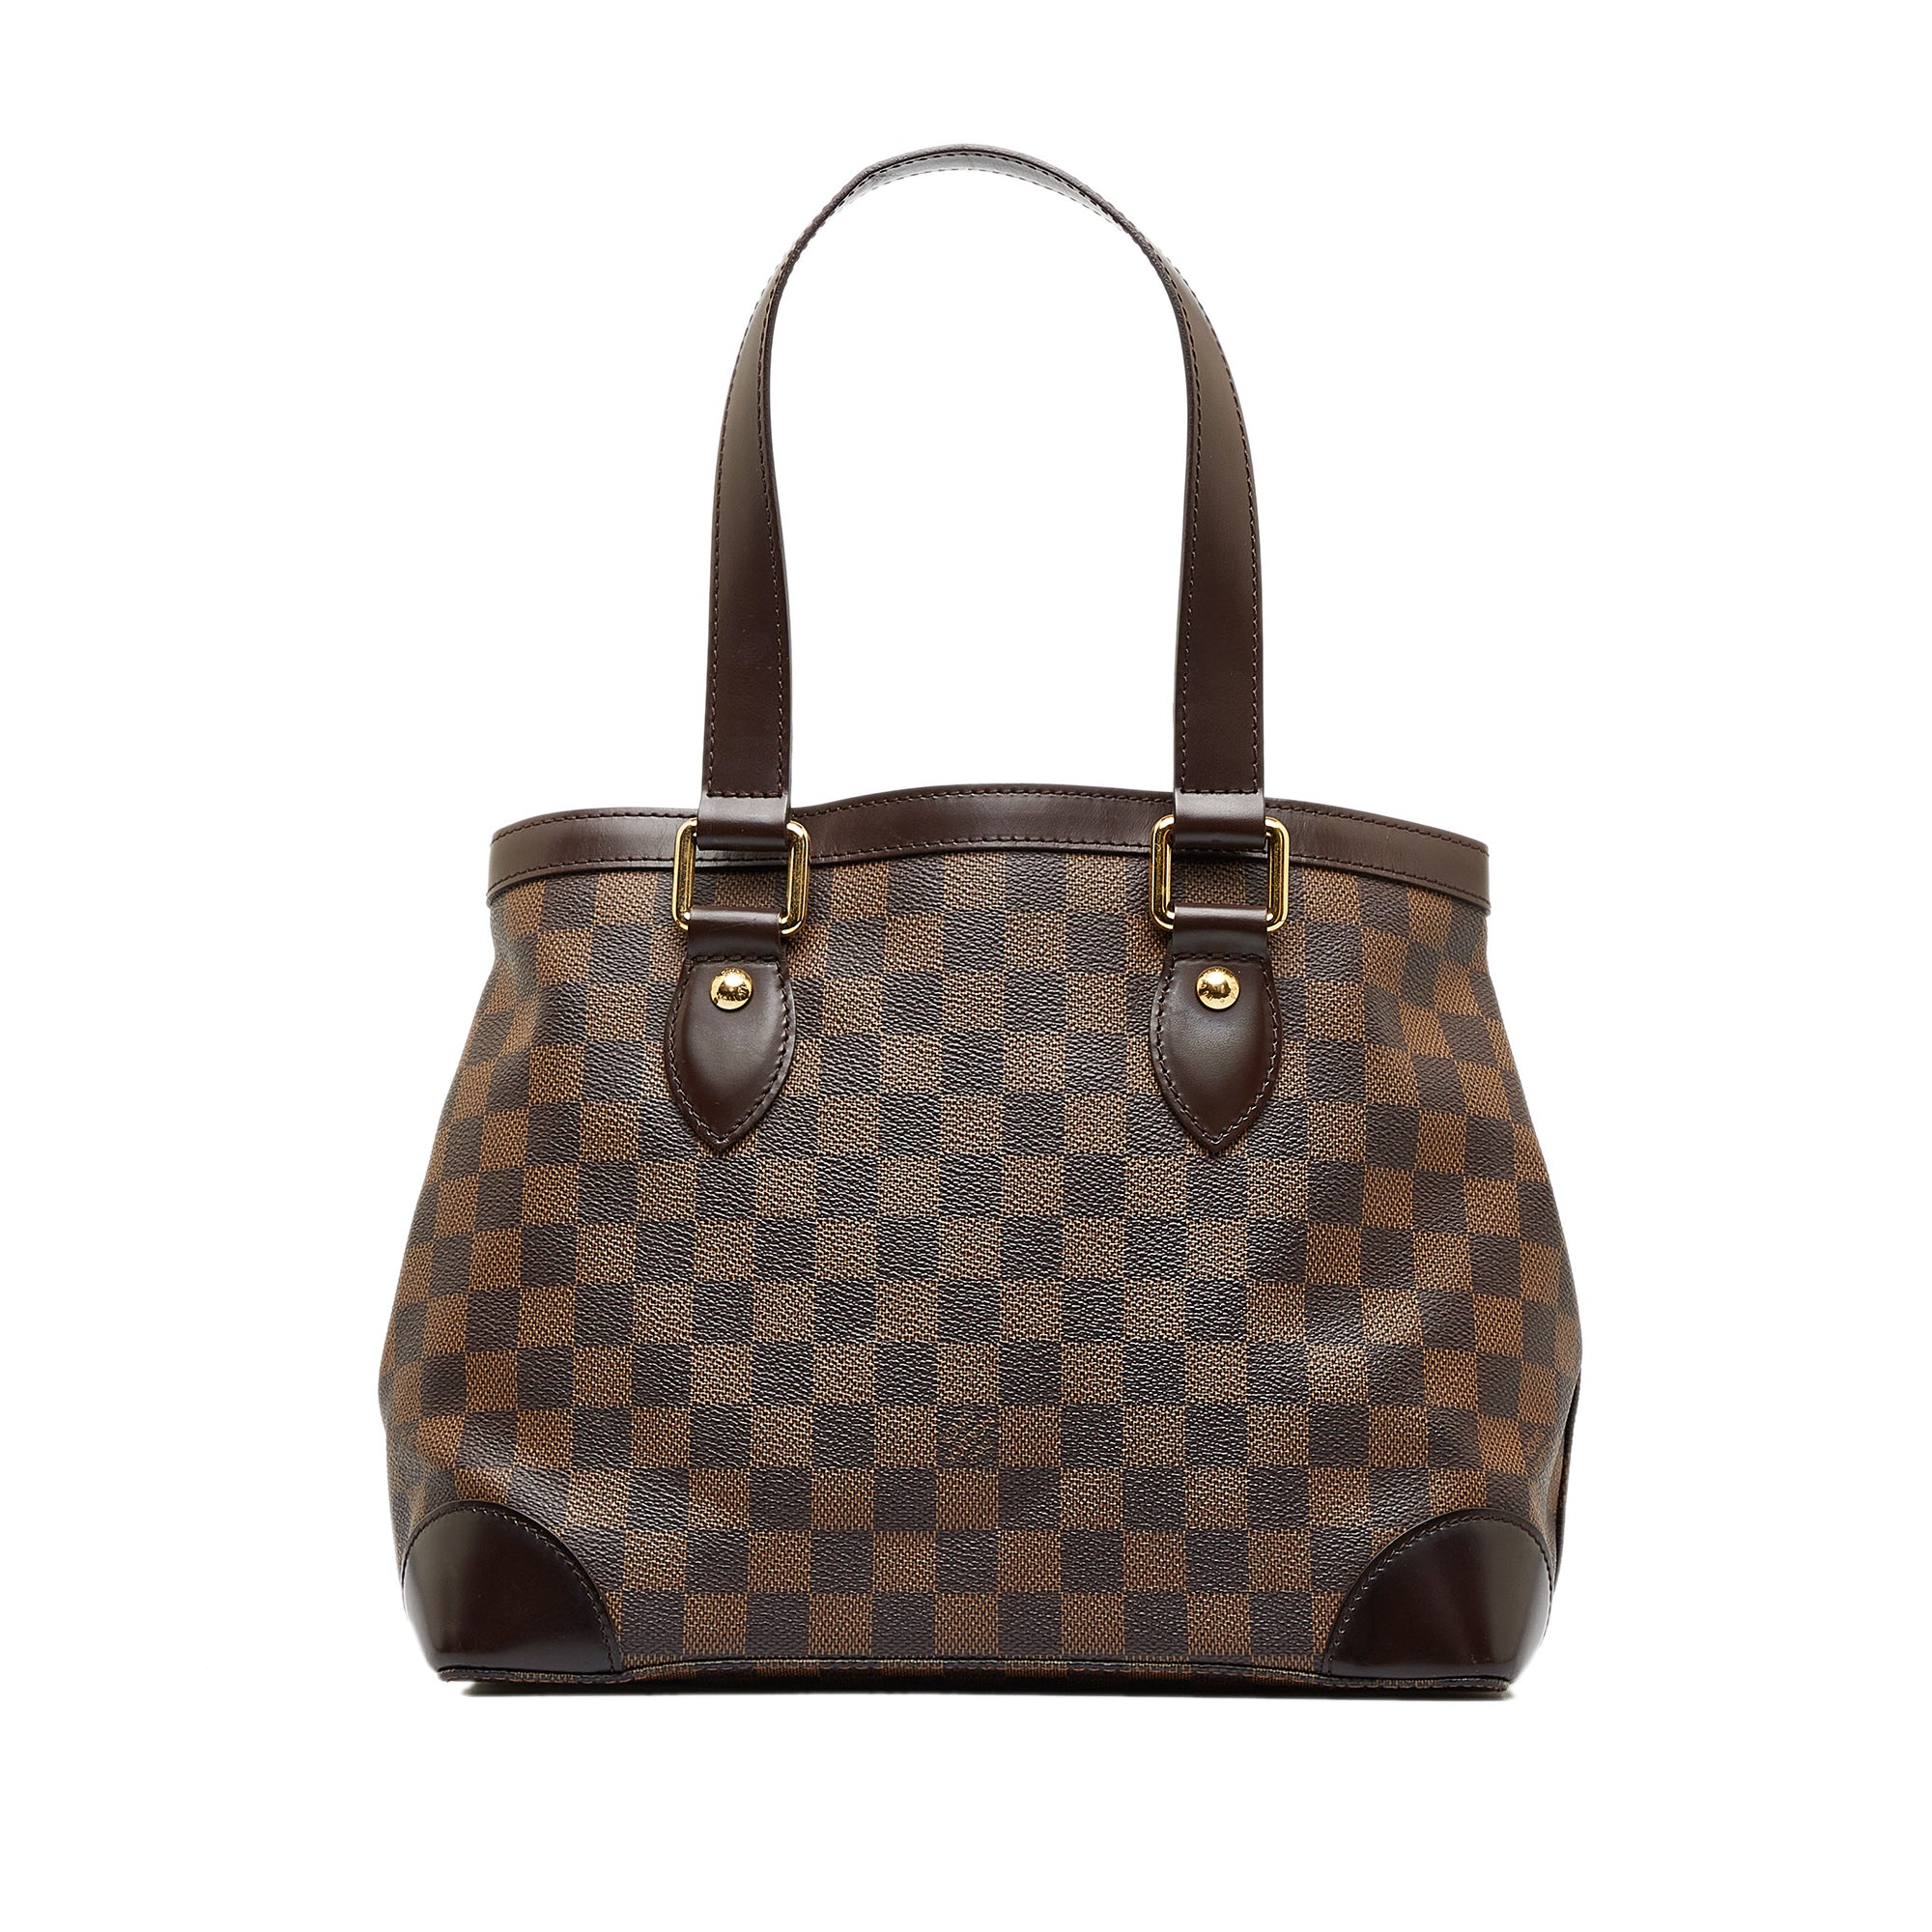 Louis Vuitton - On My Side PM Tote Bag - Black - Monogram Canvas & Leather - Women - Luxury